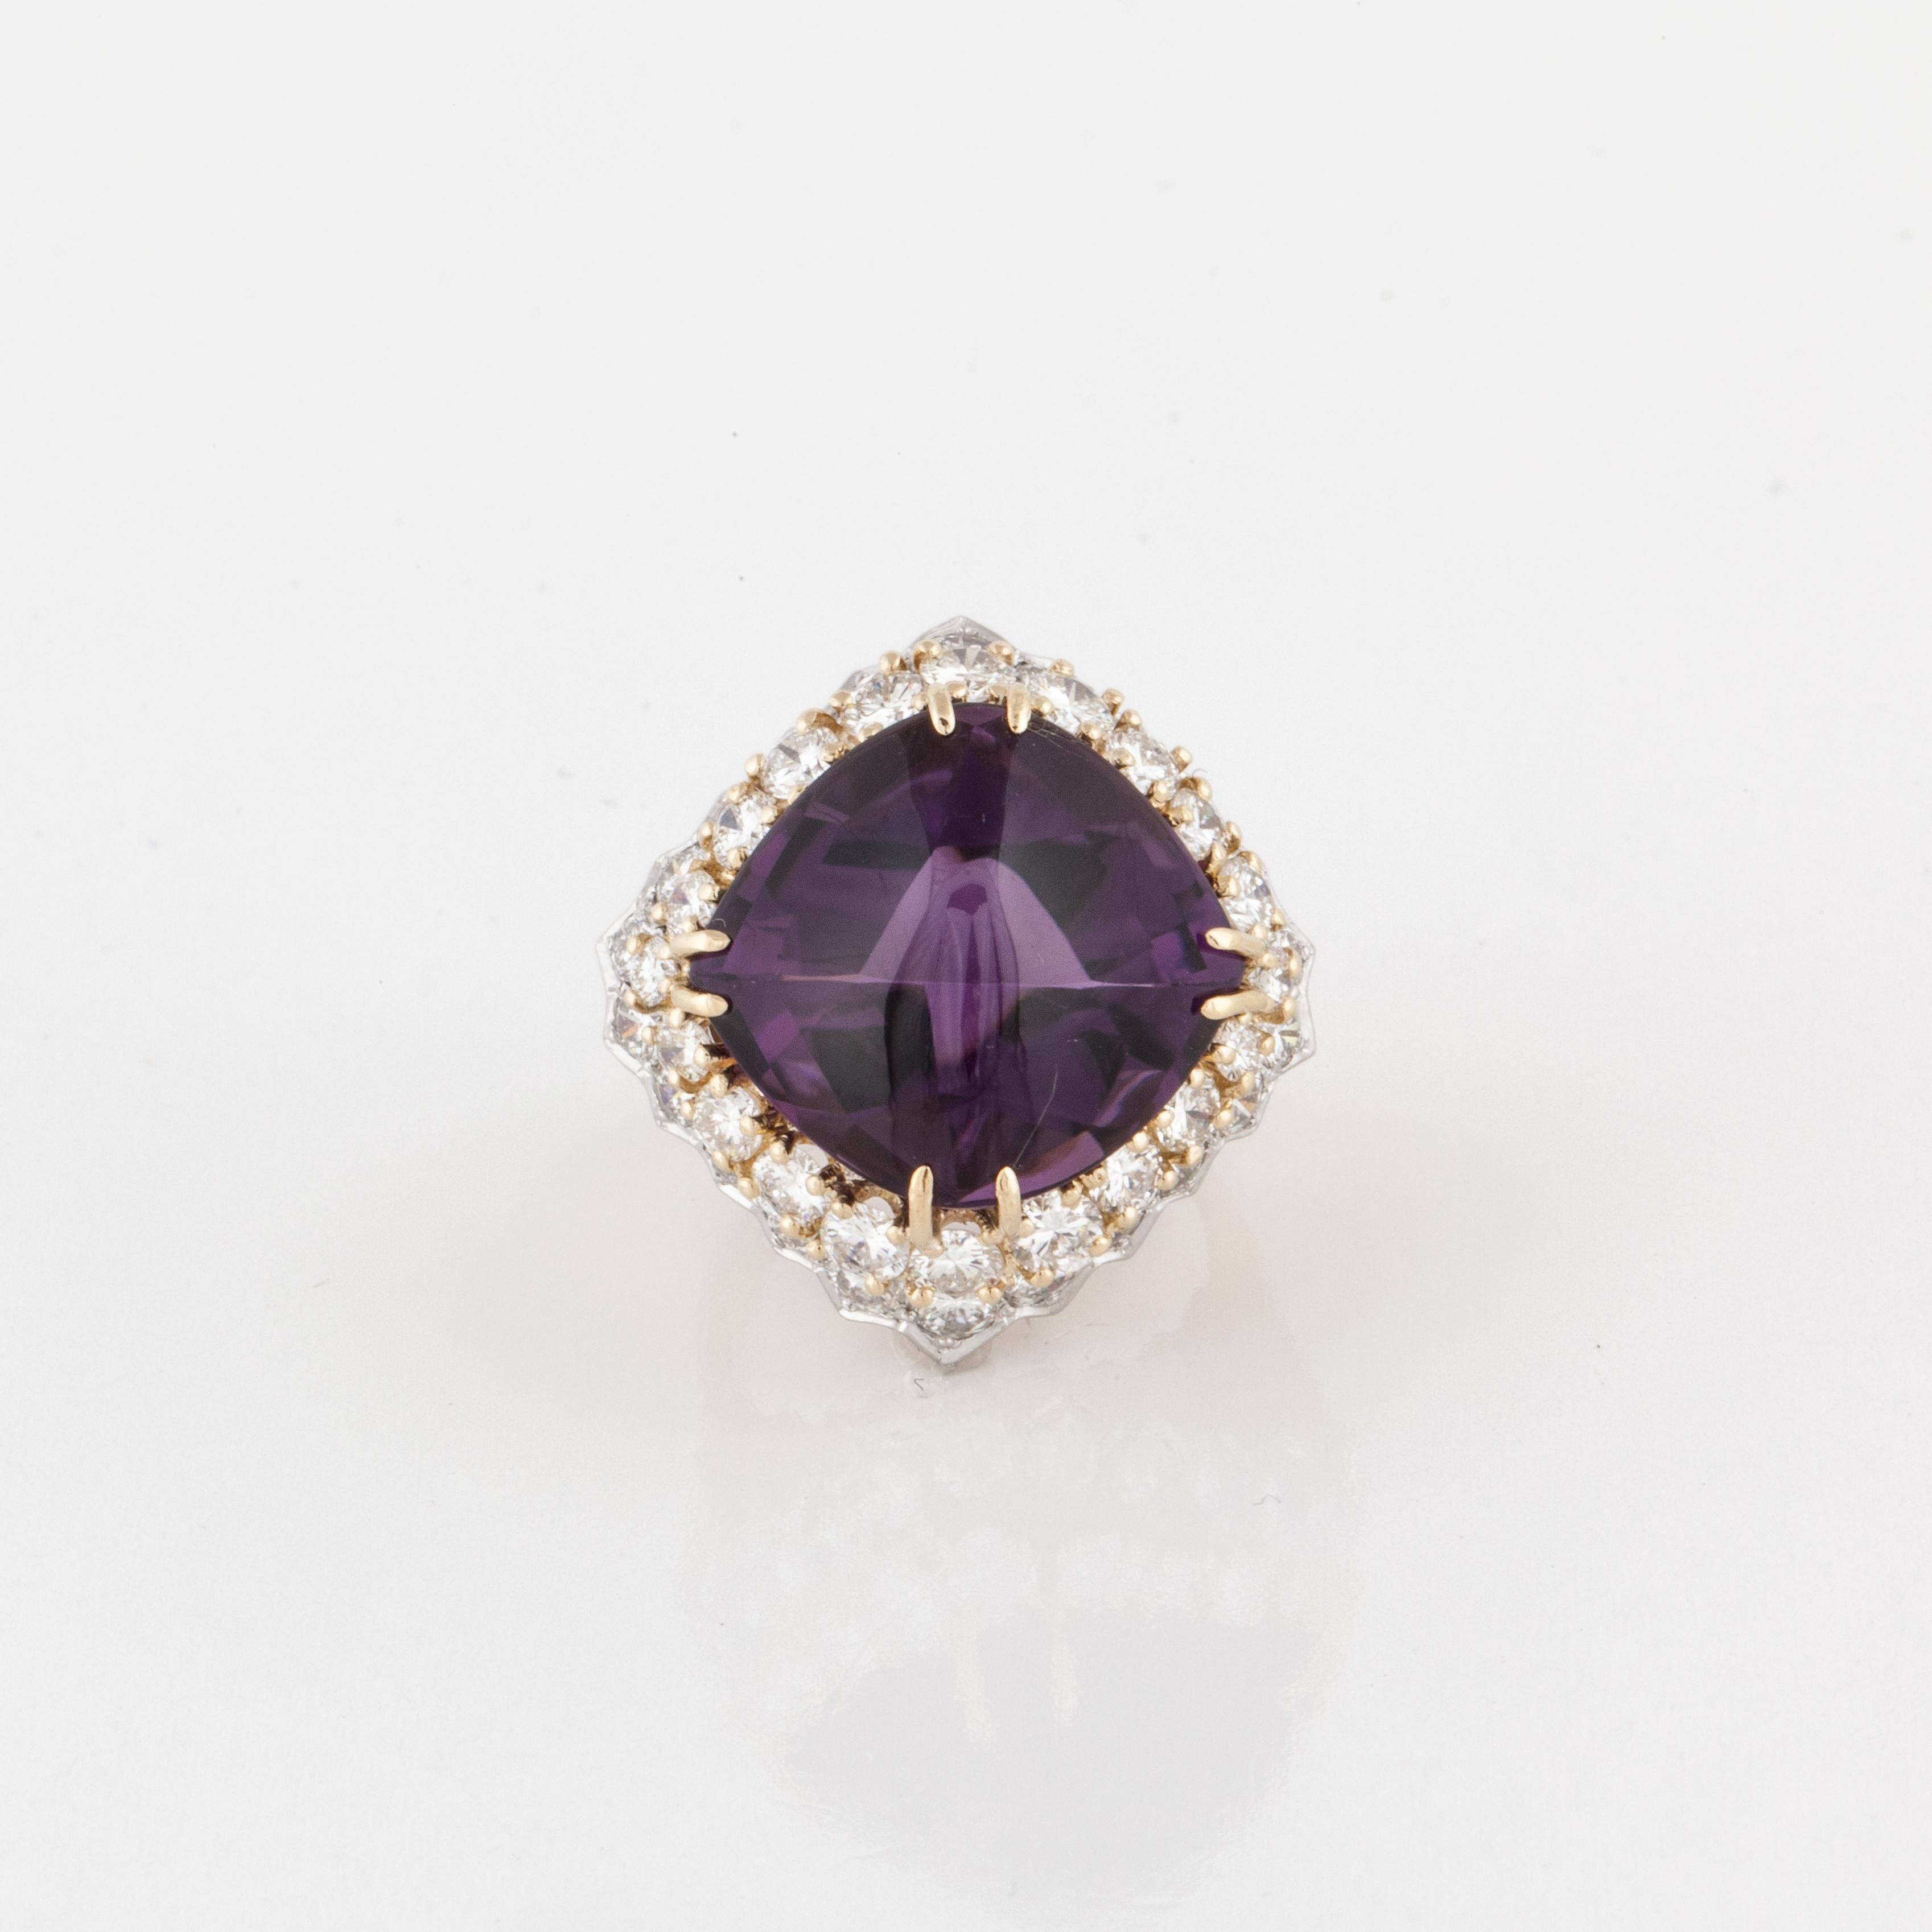 18K yellow and white gold ring featuring a cabochon amethyst with faceting on the bottom in the center.  The amethyst is framed by two layers of round diamonds.  One layer of diamonds are set in yellow gold and the bottom layer is set in white gold.